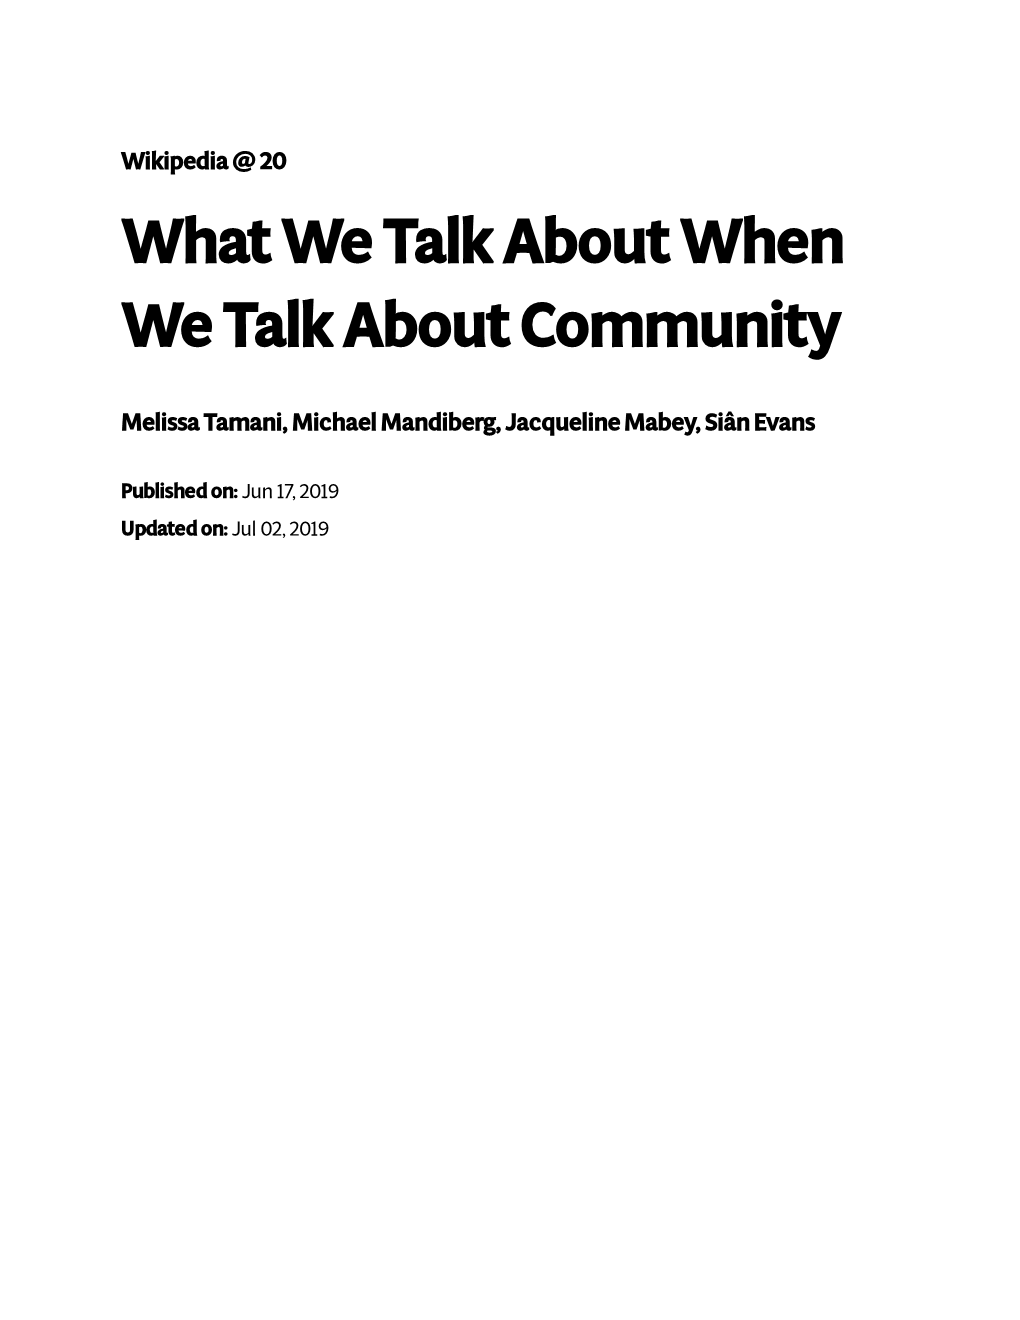 What We Talk About When We Talk About Community